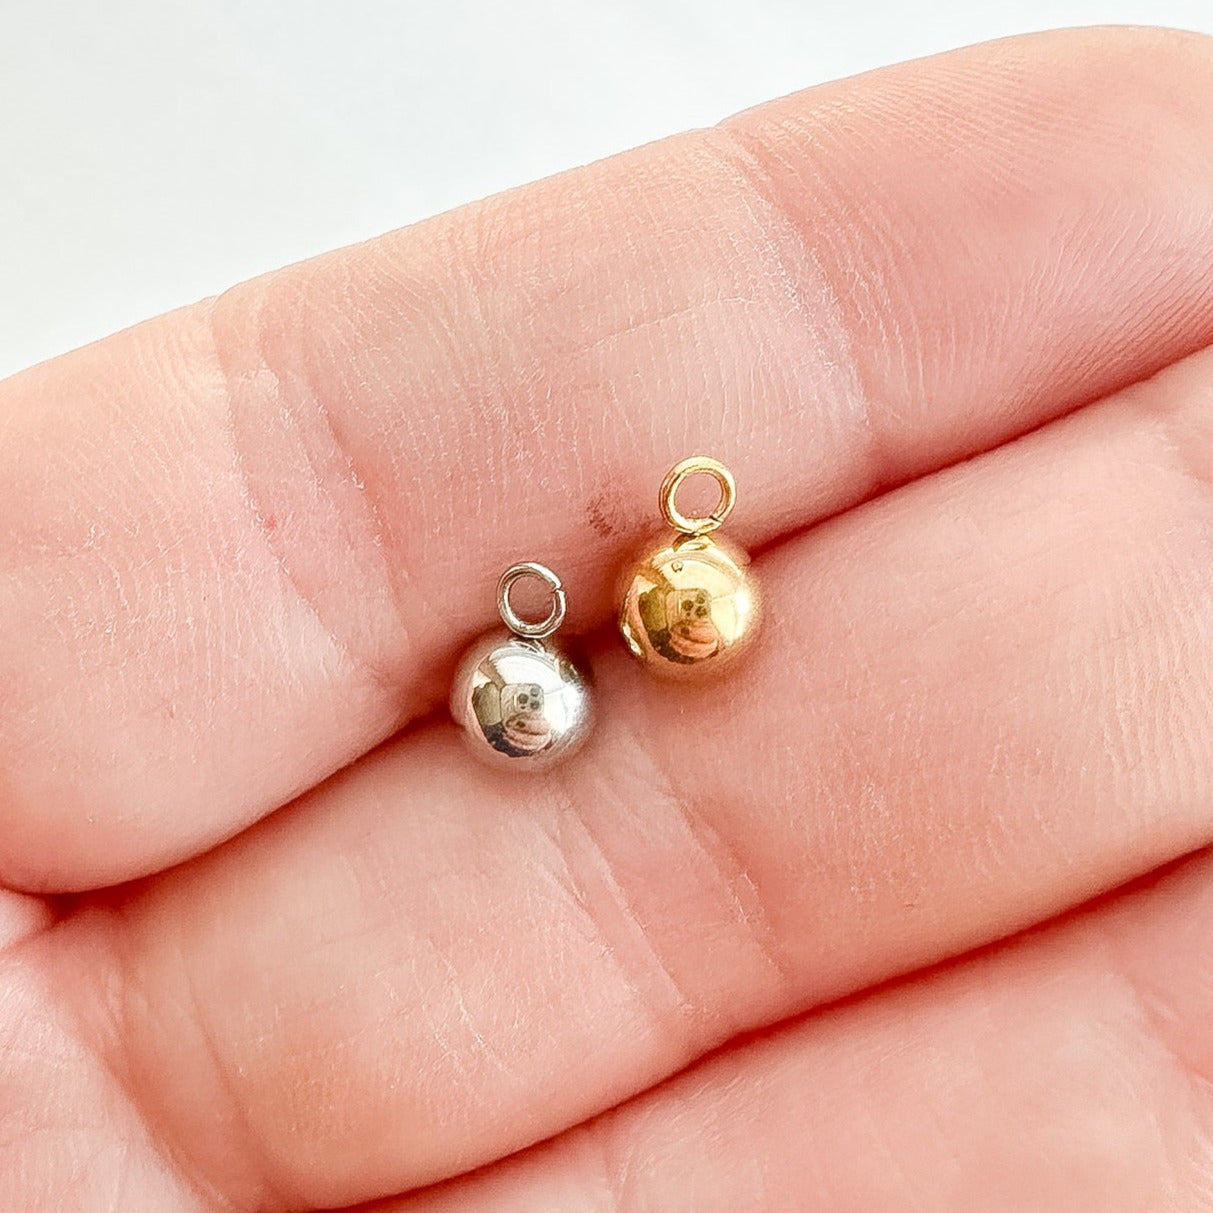 Ball Charm Dangles - 20 PIECES - OCTOBER LAUNCH